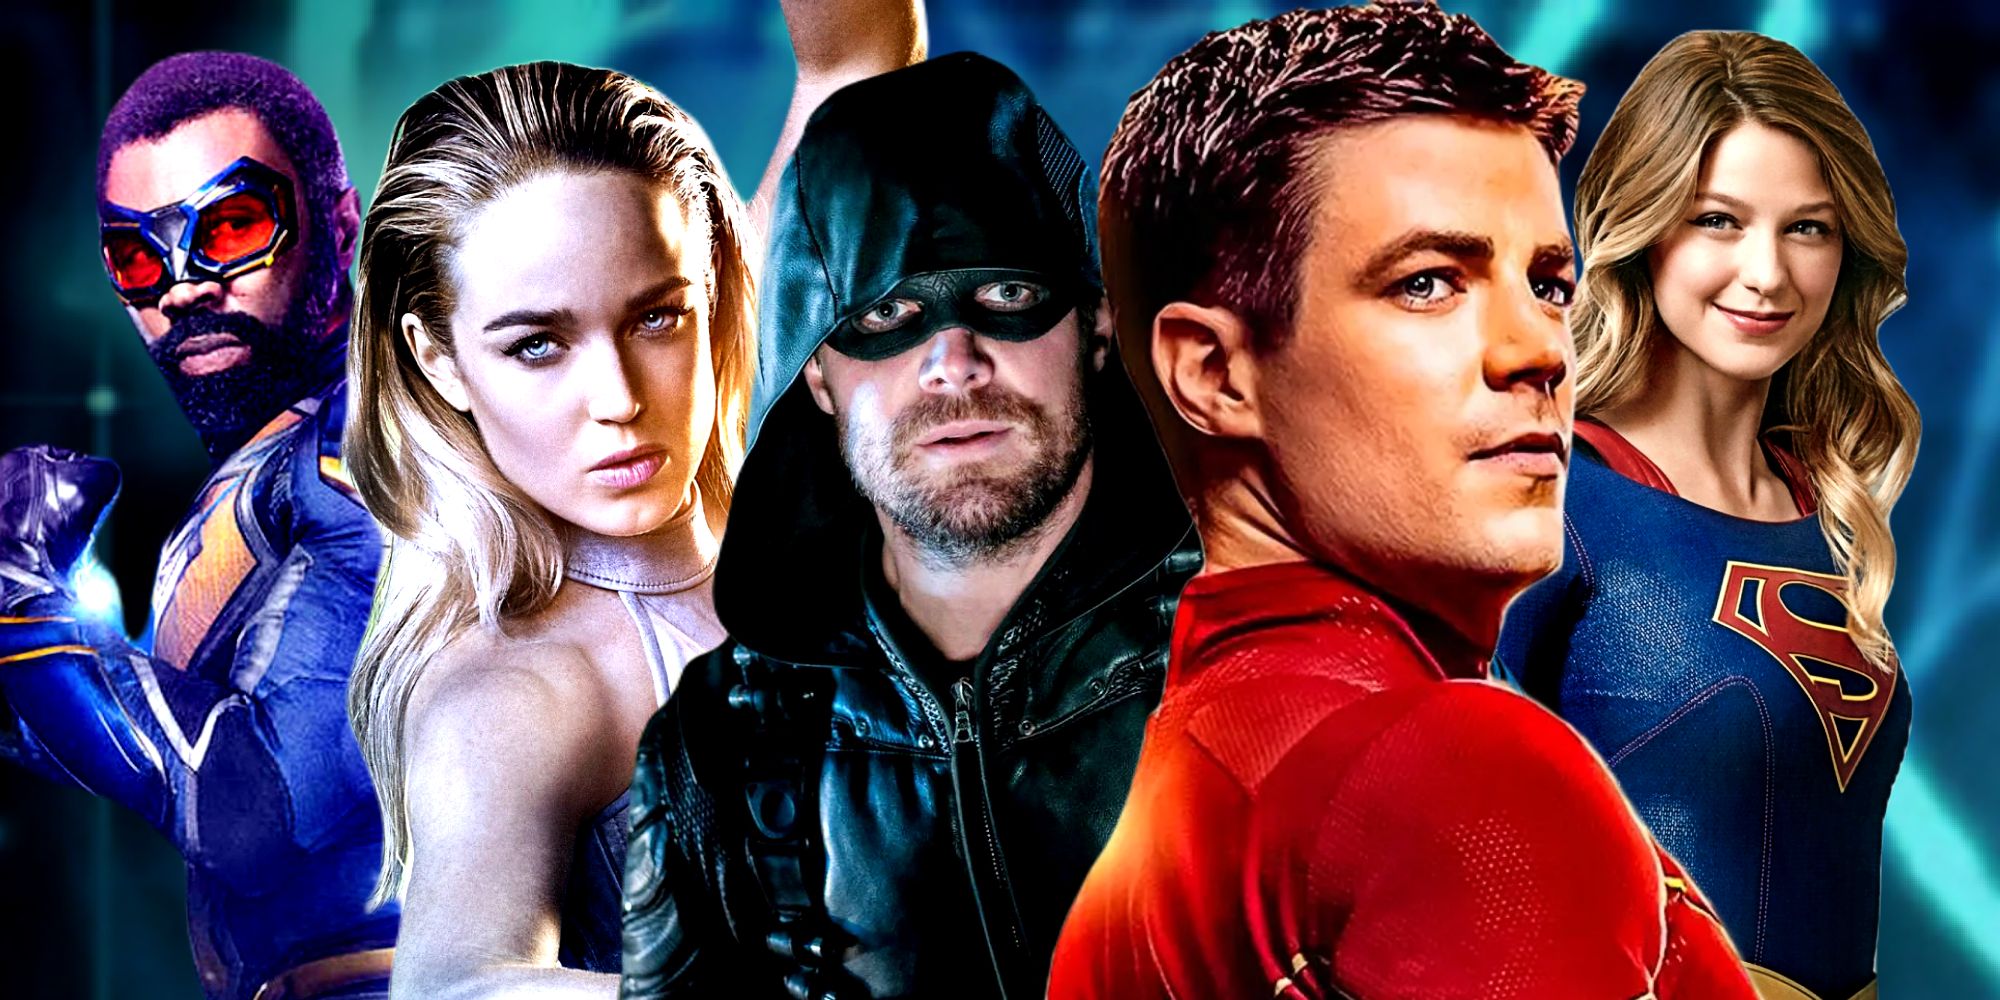 Data Proves The Arrowverse Is Still Massively Popular In 2023 – 11 Years After It Launched